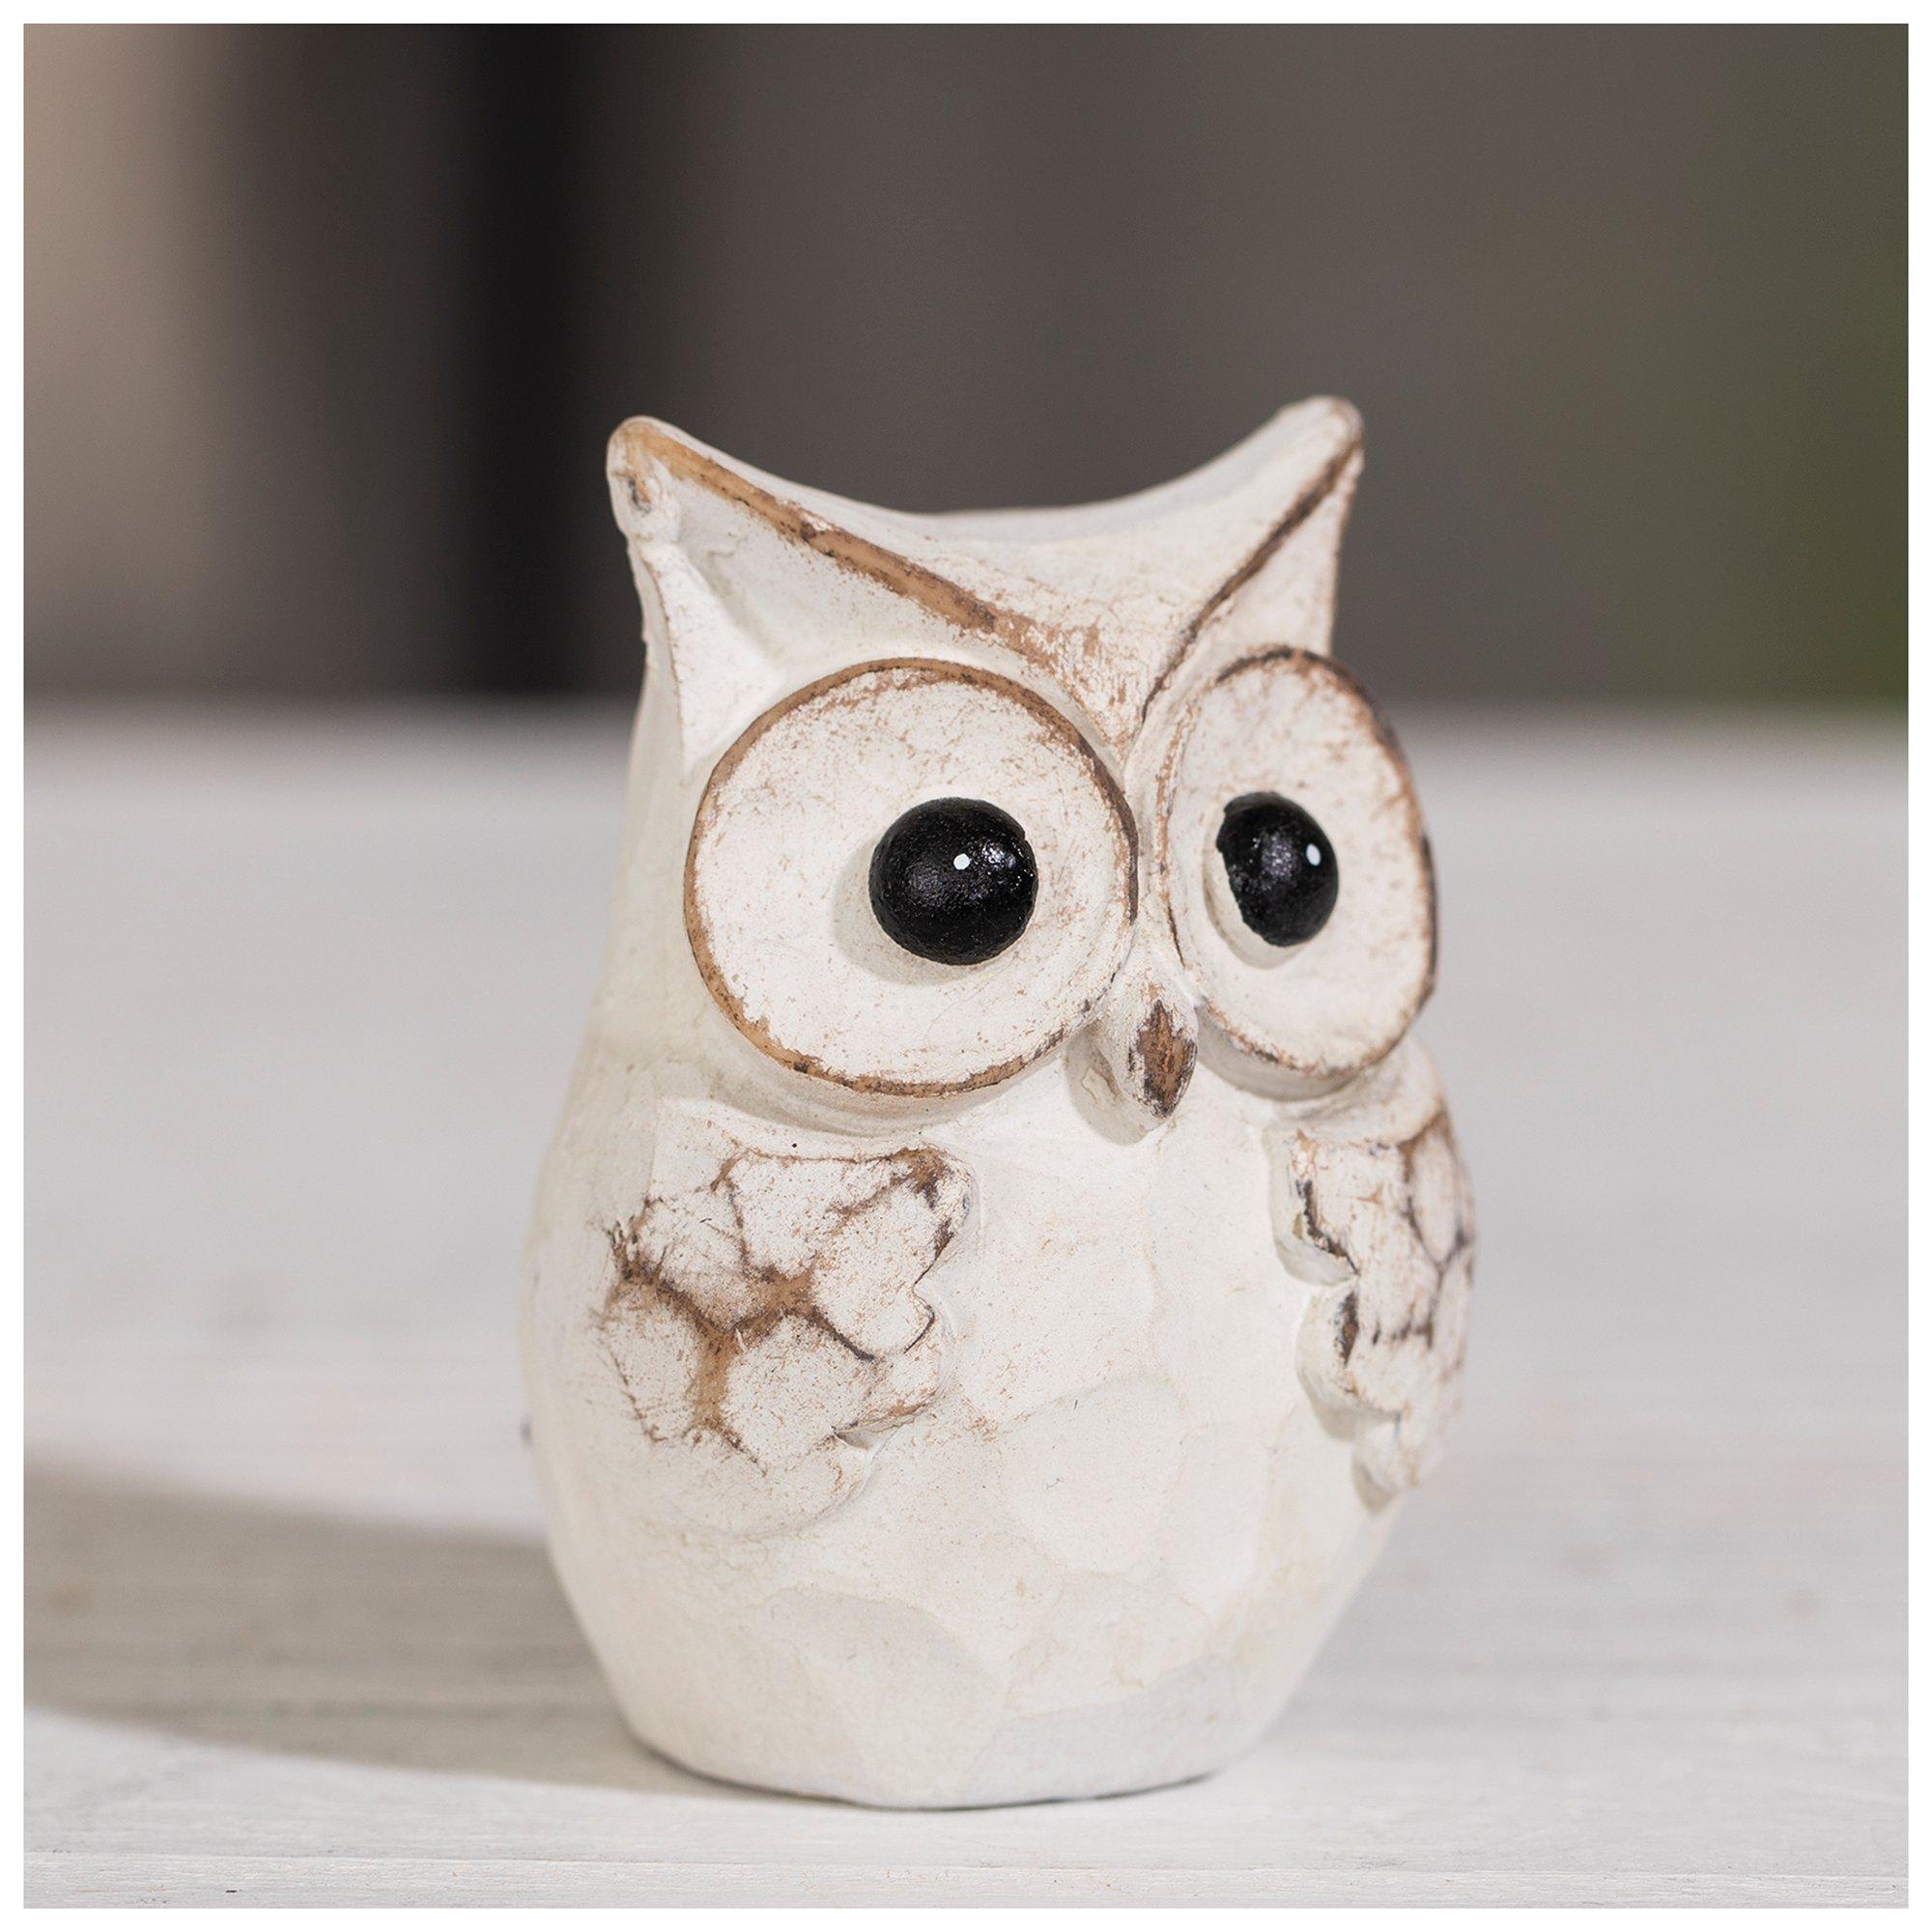 Ceramic Owl Bead for Macrame - $3.99 : Statuary Place Online Store